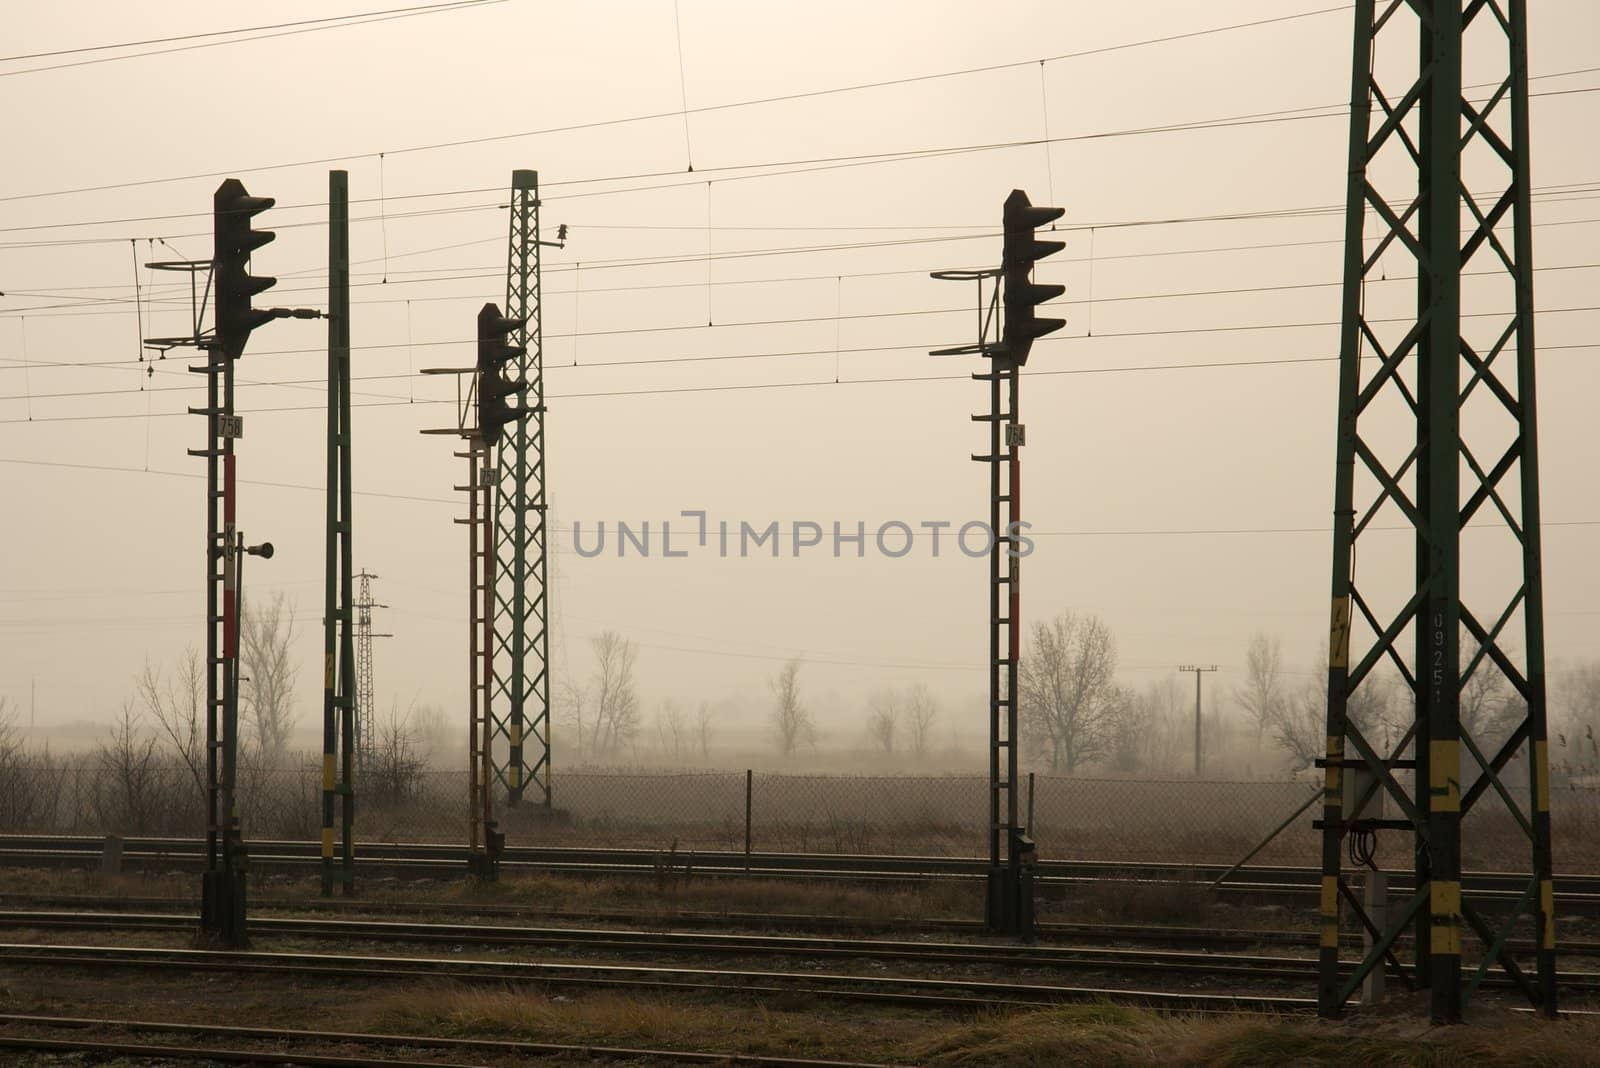 Railway tracks and traffic signals in a foggy landscape